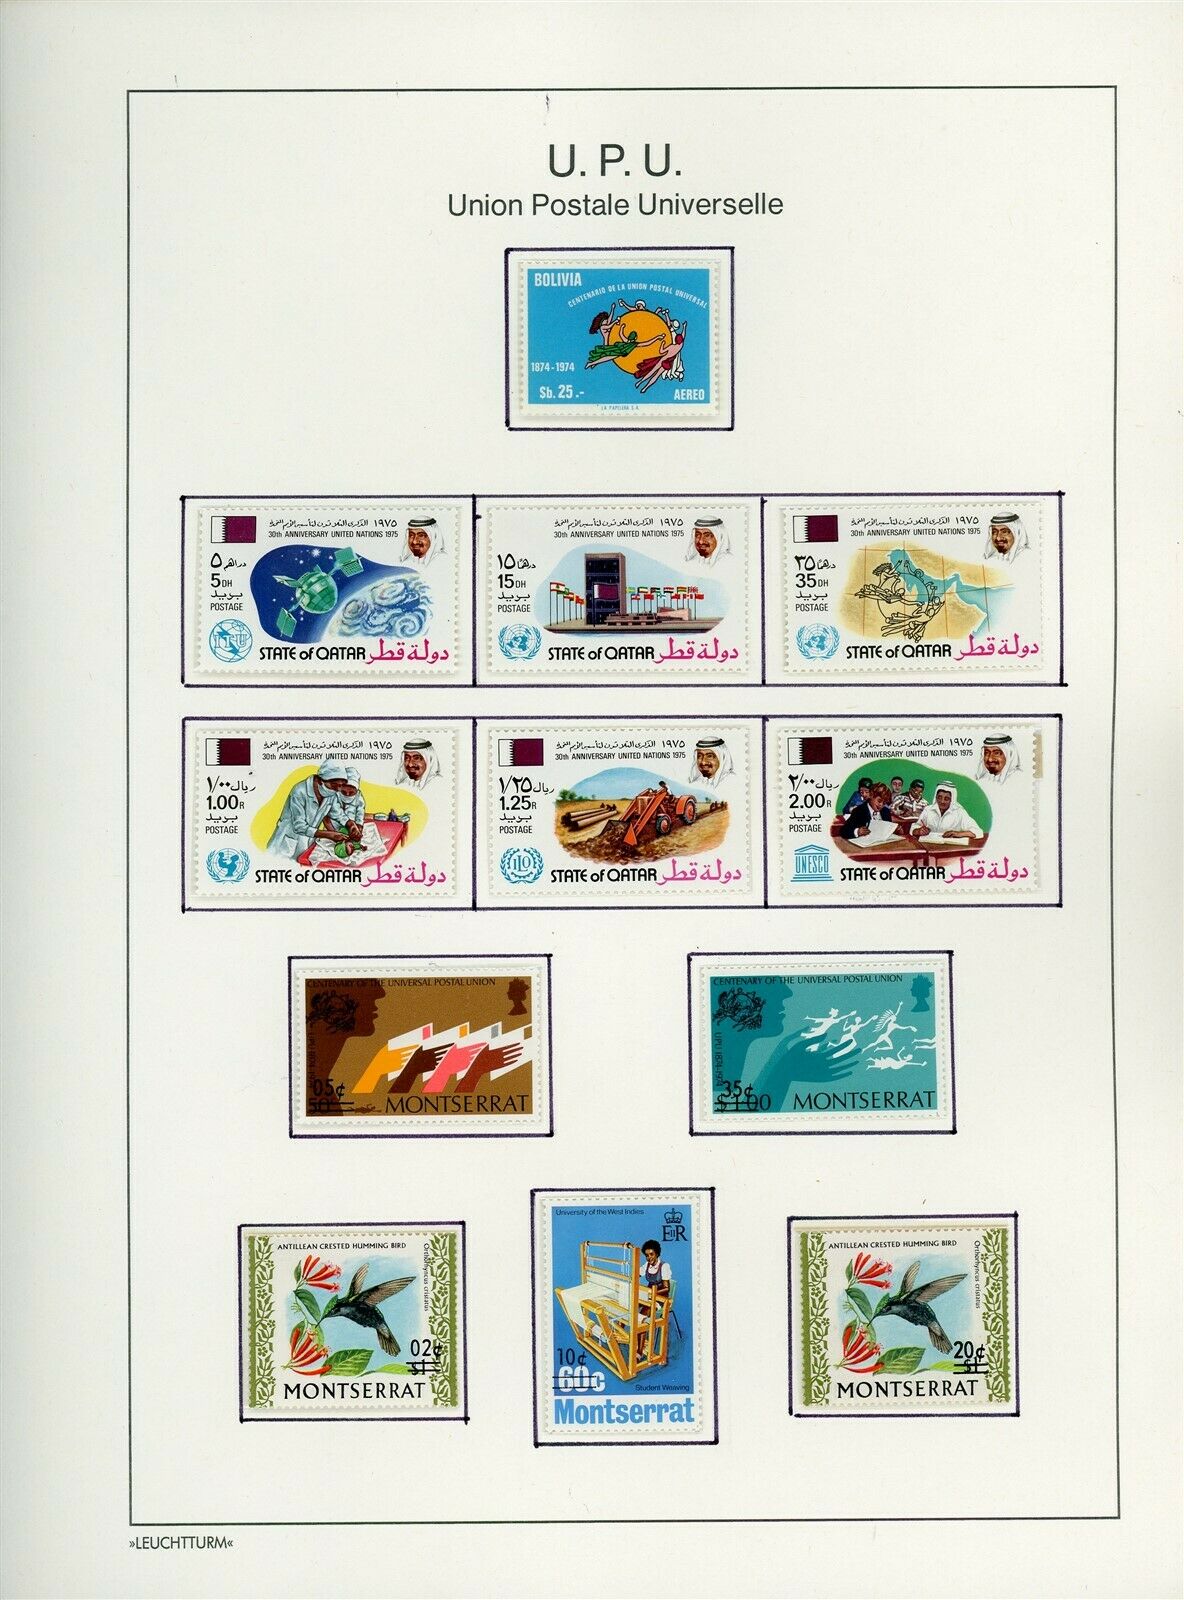 Upu Centenary (1974) Lighthouse Specialty Album Page Lot #170 - See Scan - $$$